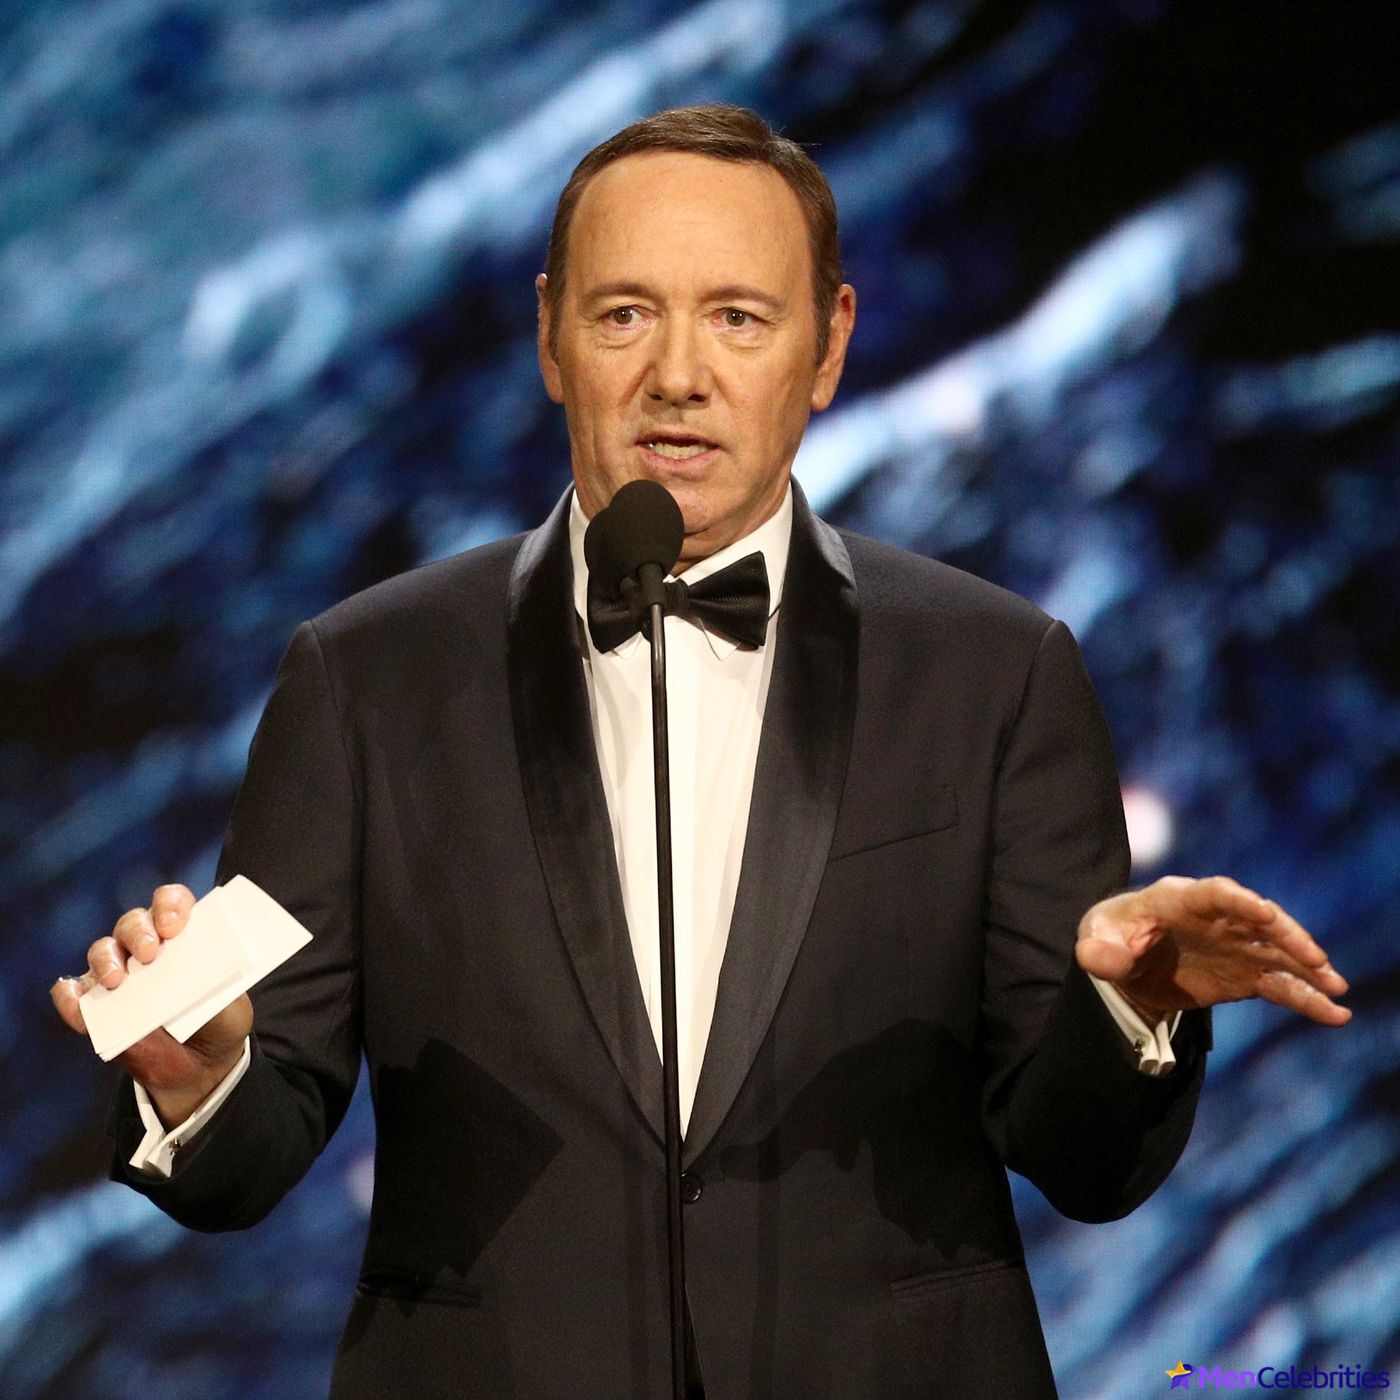 Kevin Spacey tears up in court